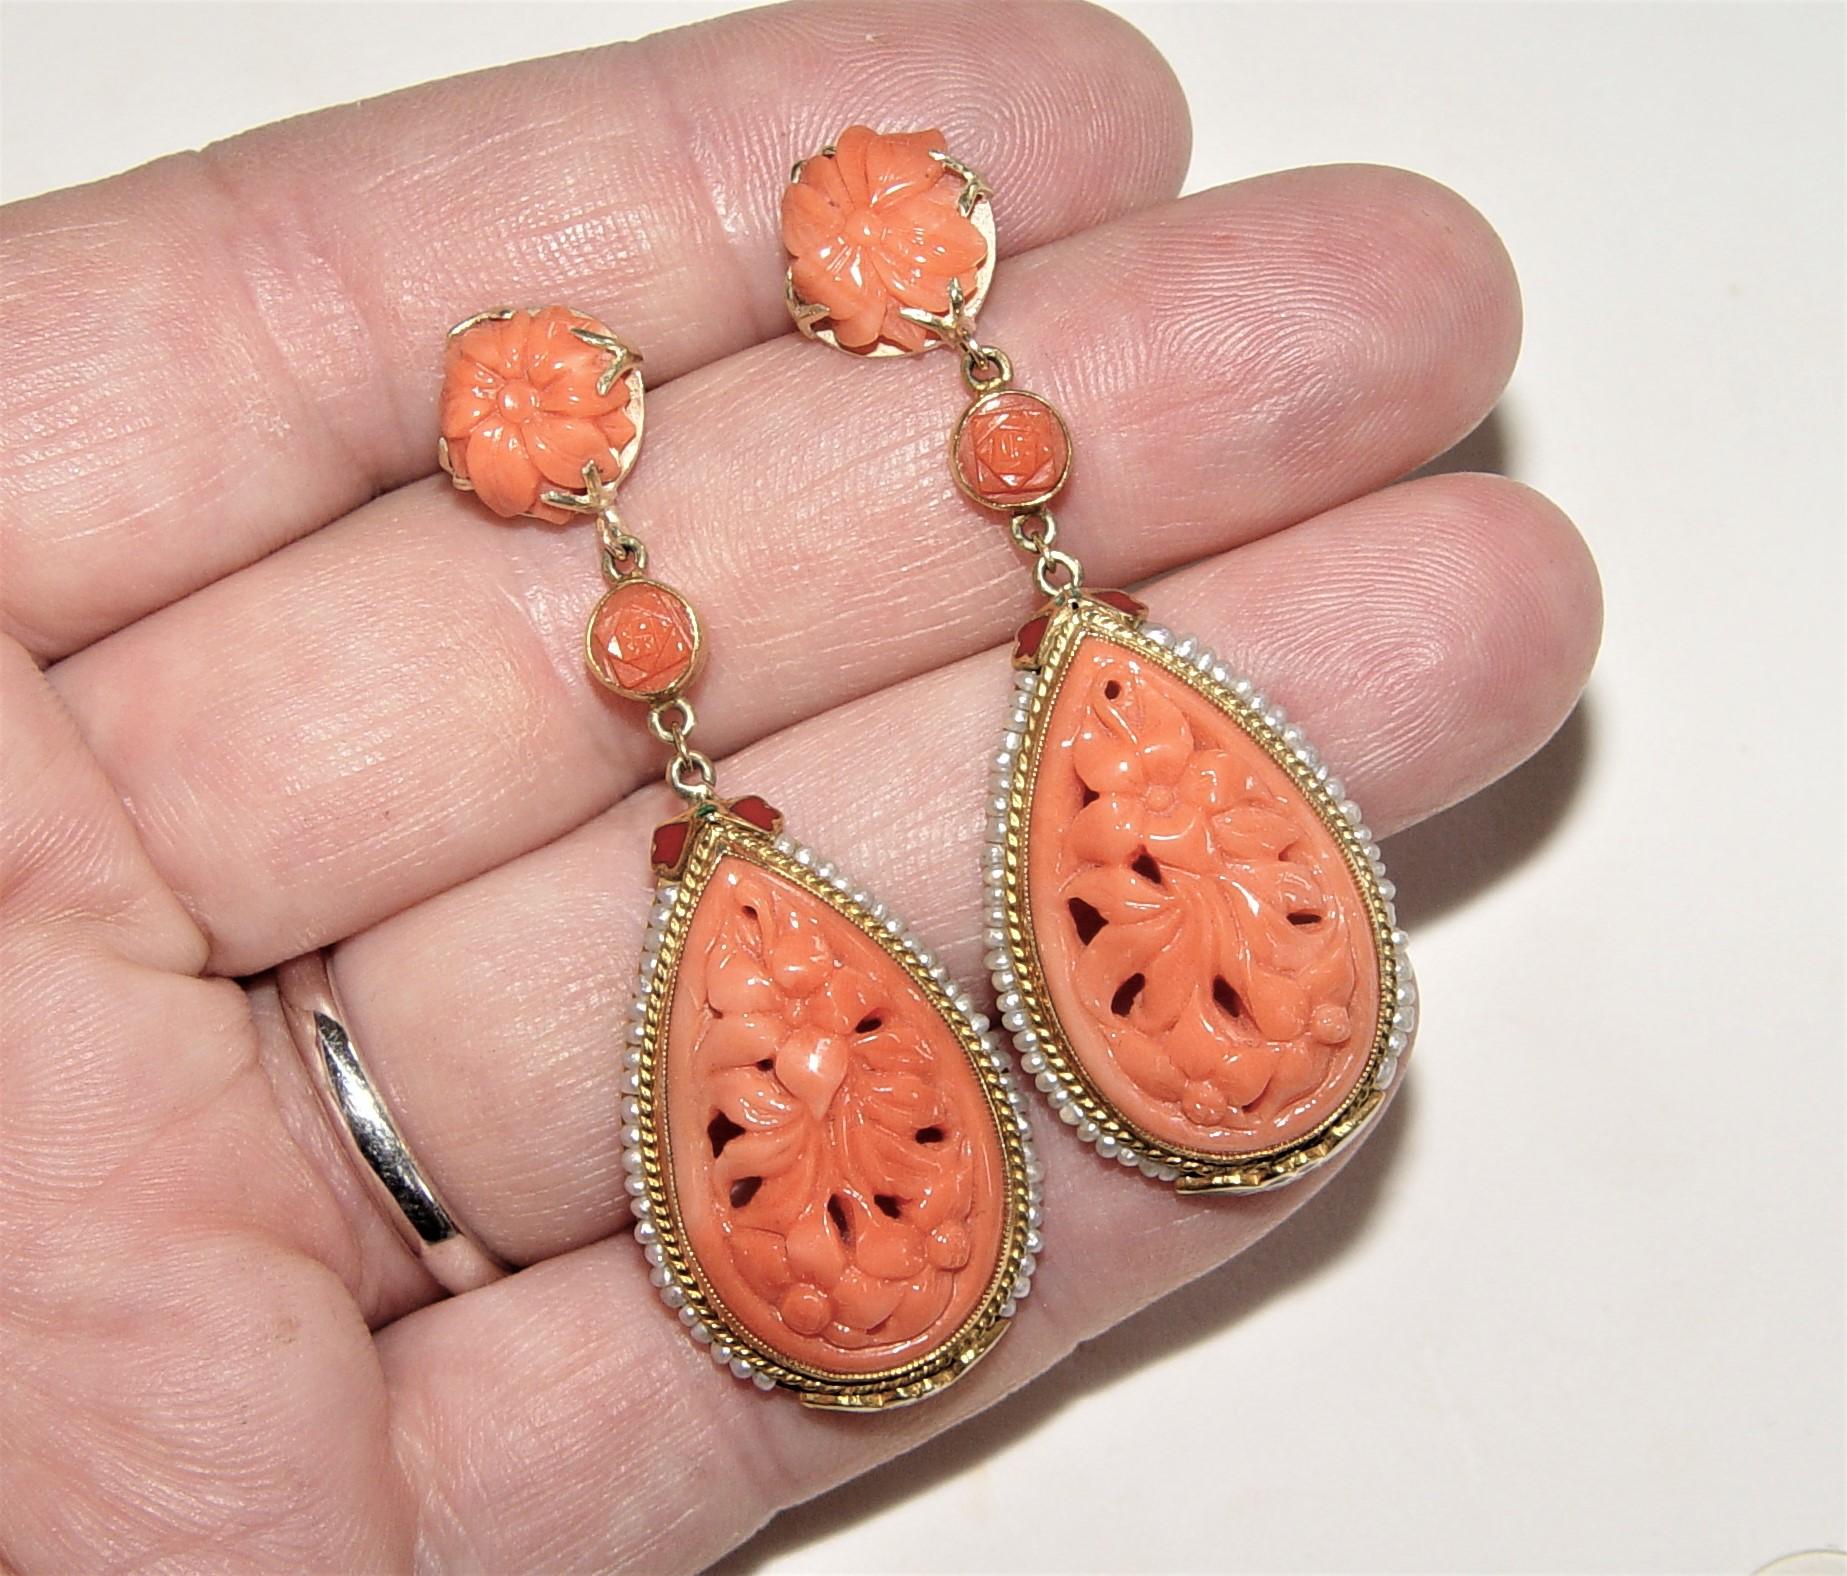 Elegant Victorian medallion style dangling earrings featuring curved coral - gorgeous floral design, surrounded with seed pearls and small enamel floral accents. The ear part of each earring contains 7mm carved coral flower with bezel set carved